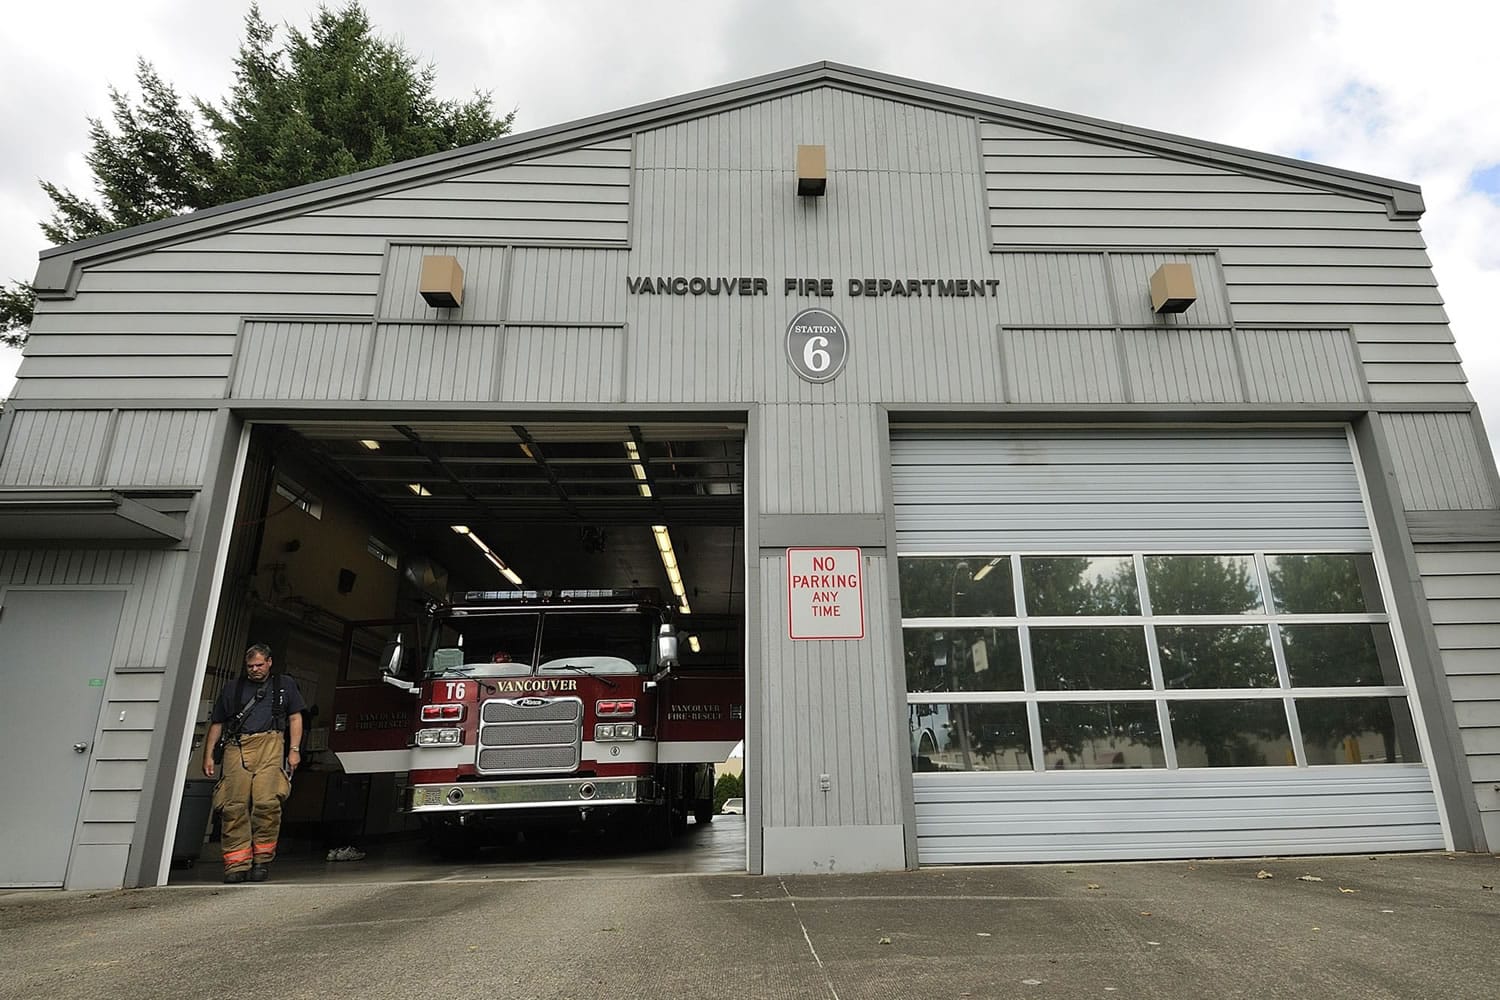 The Vancouver City Council postponed a decision Monday night about whether to accept a $2.3 million federal grant to reopen and staff Fire Station 6 until Tuesday, Aug.